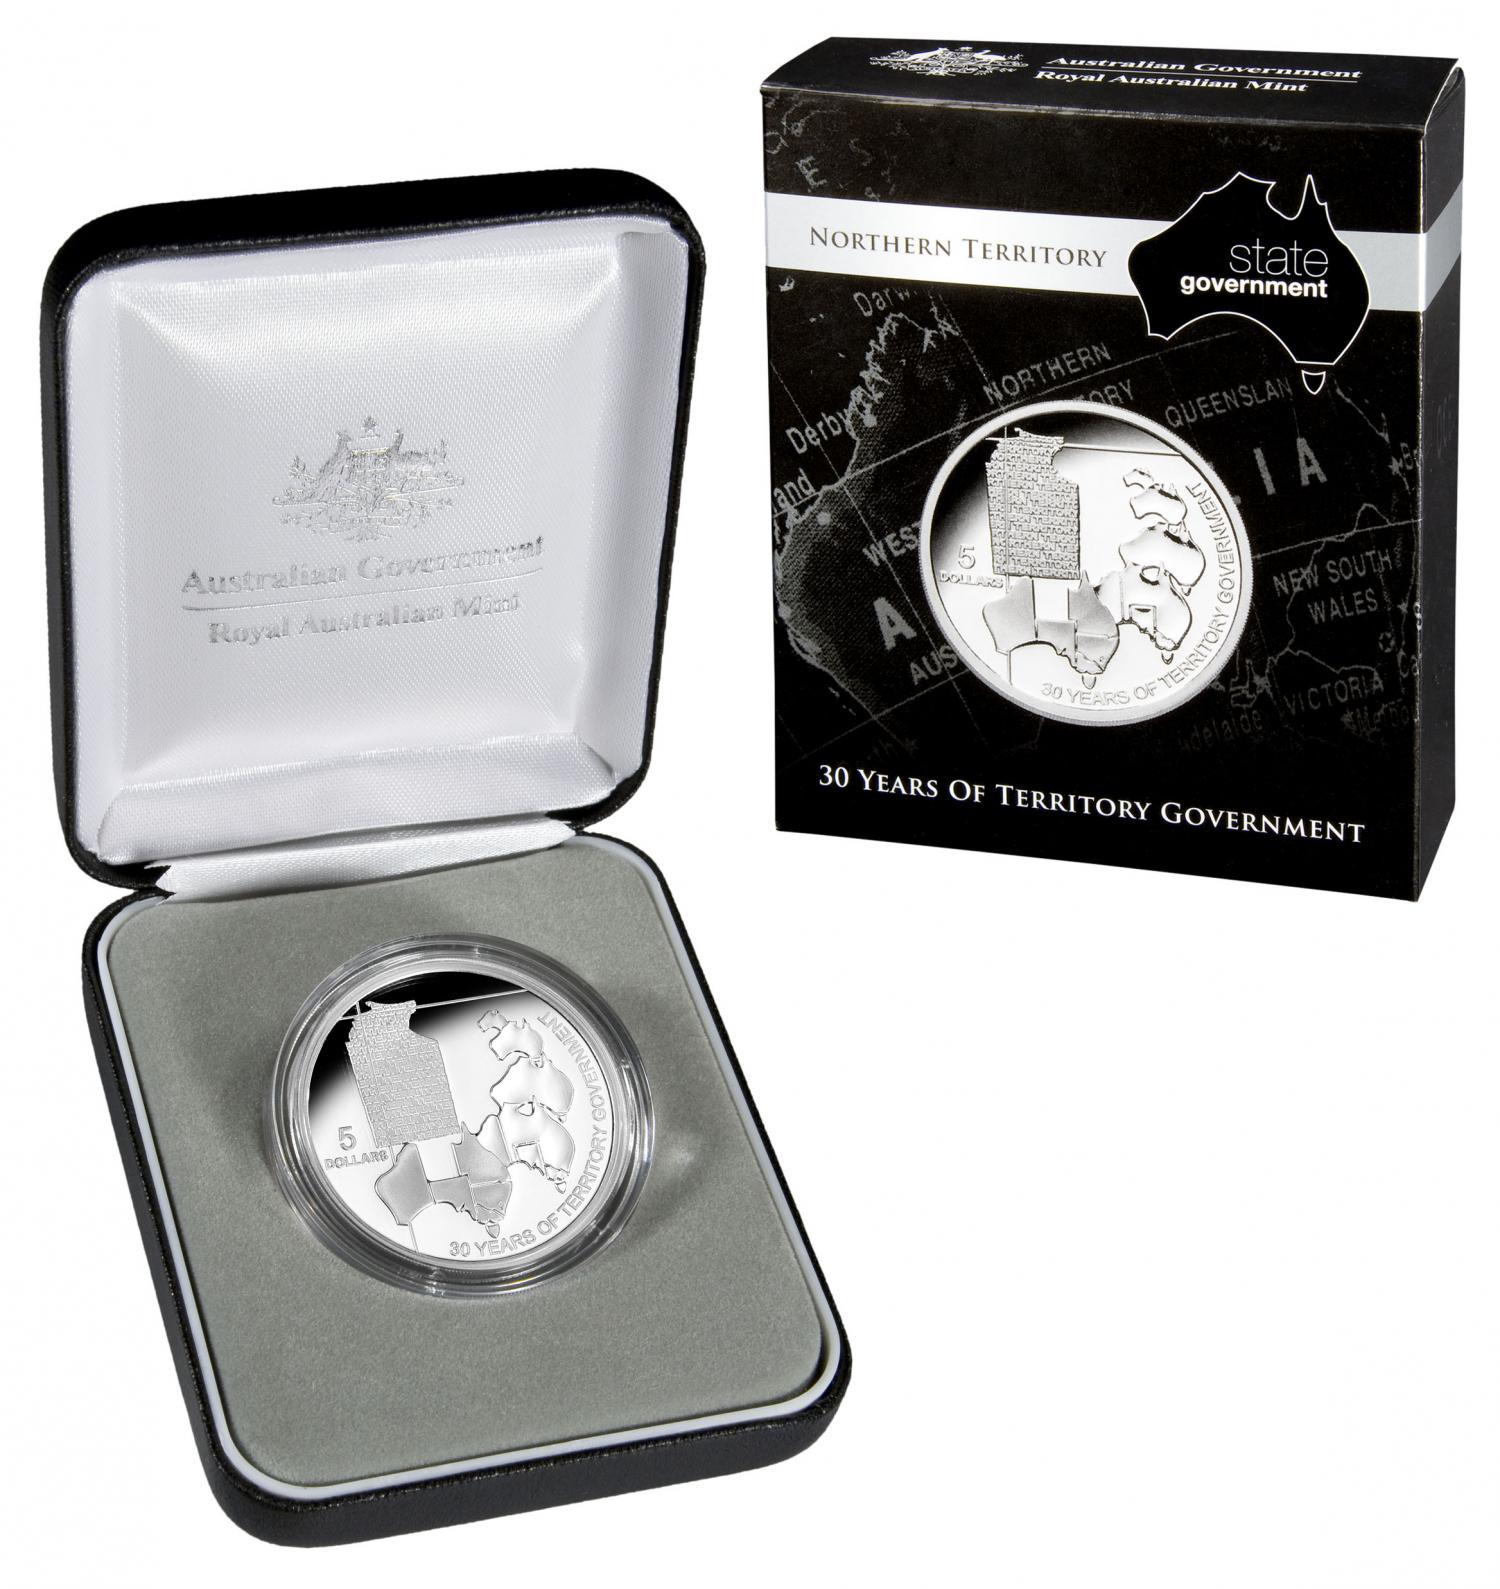 Thumbnail for 2008 $5.00 Silver Proof Northern Territory 30 Years of Territory Government